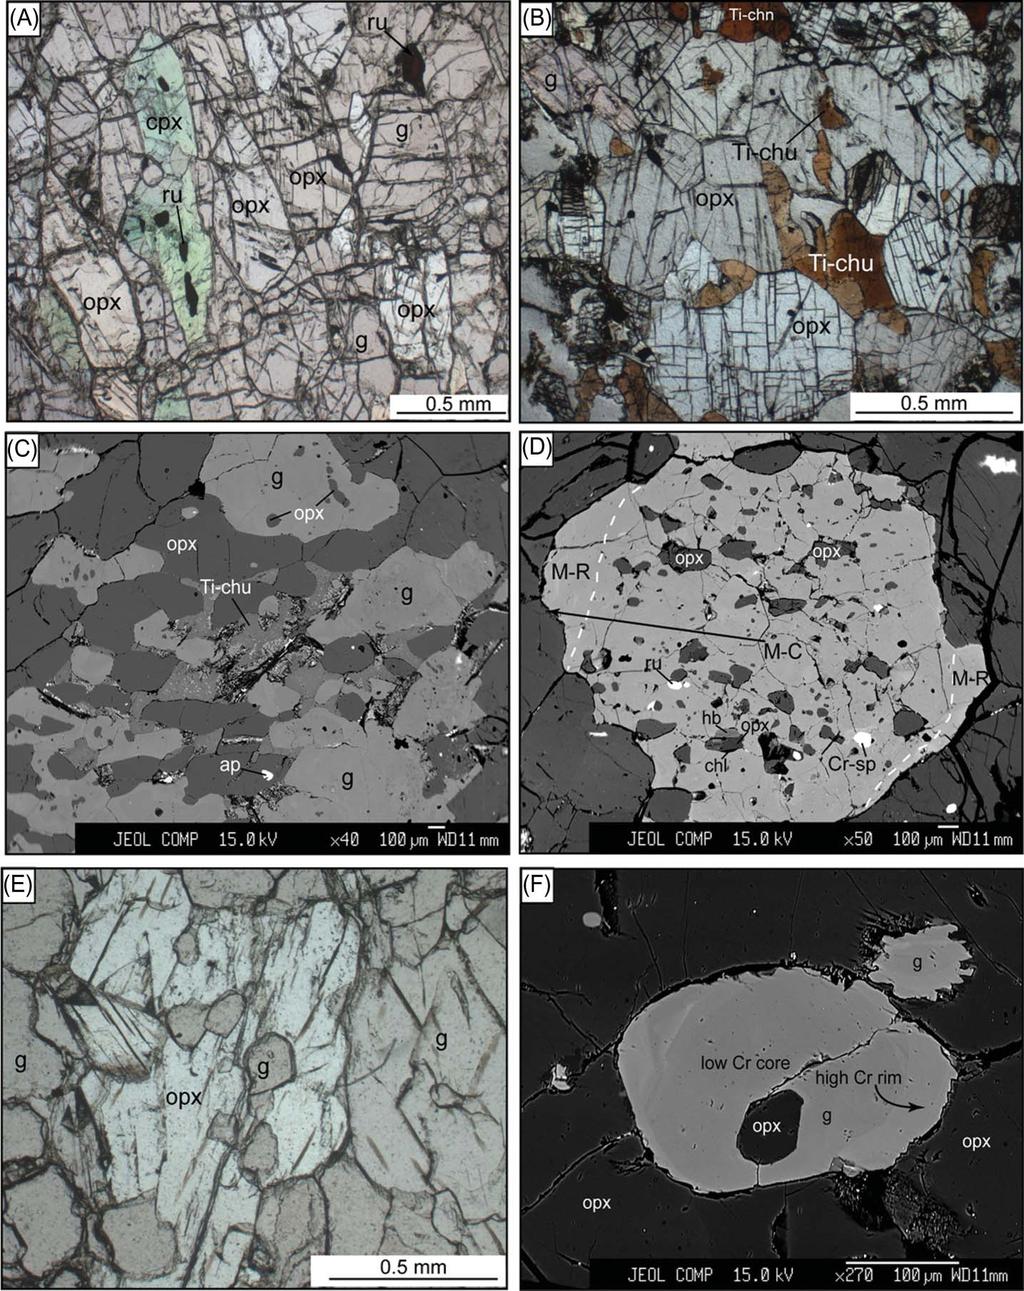 International Geology Review 1243 Figure 3. (A) Photomicrograph showing matrix garnet, orthopyroxene, and clinopyroxene; rutile commonly occurs as inclusions in the clinopyroxene.